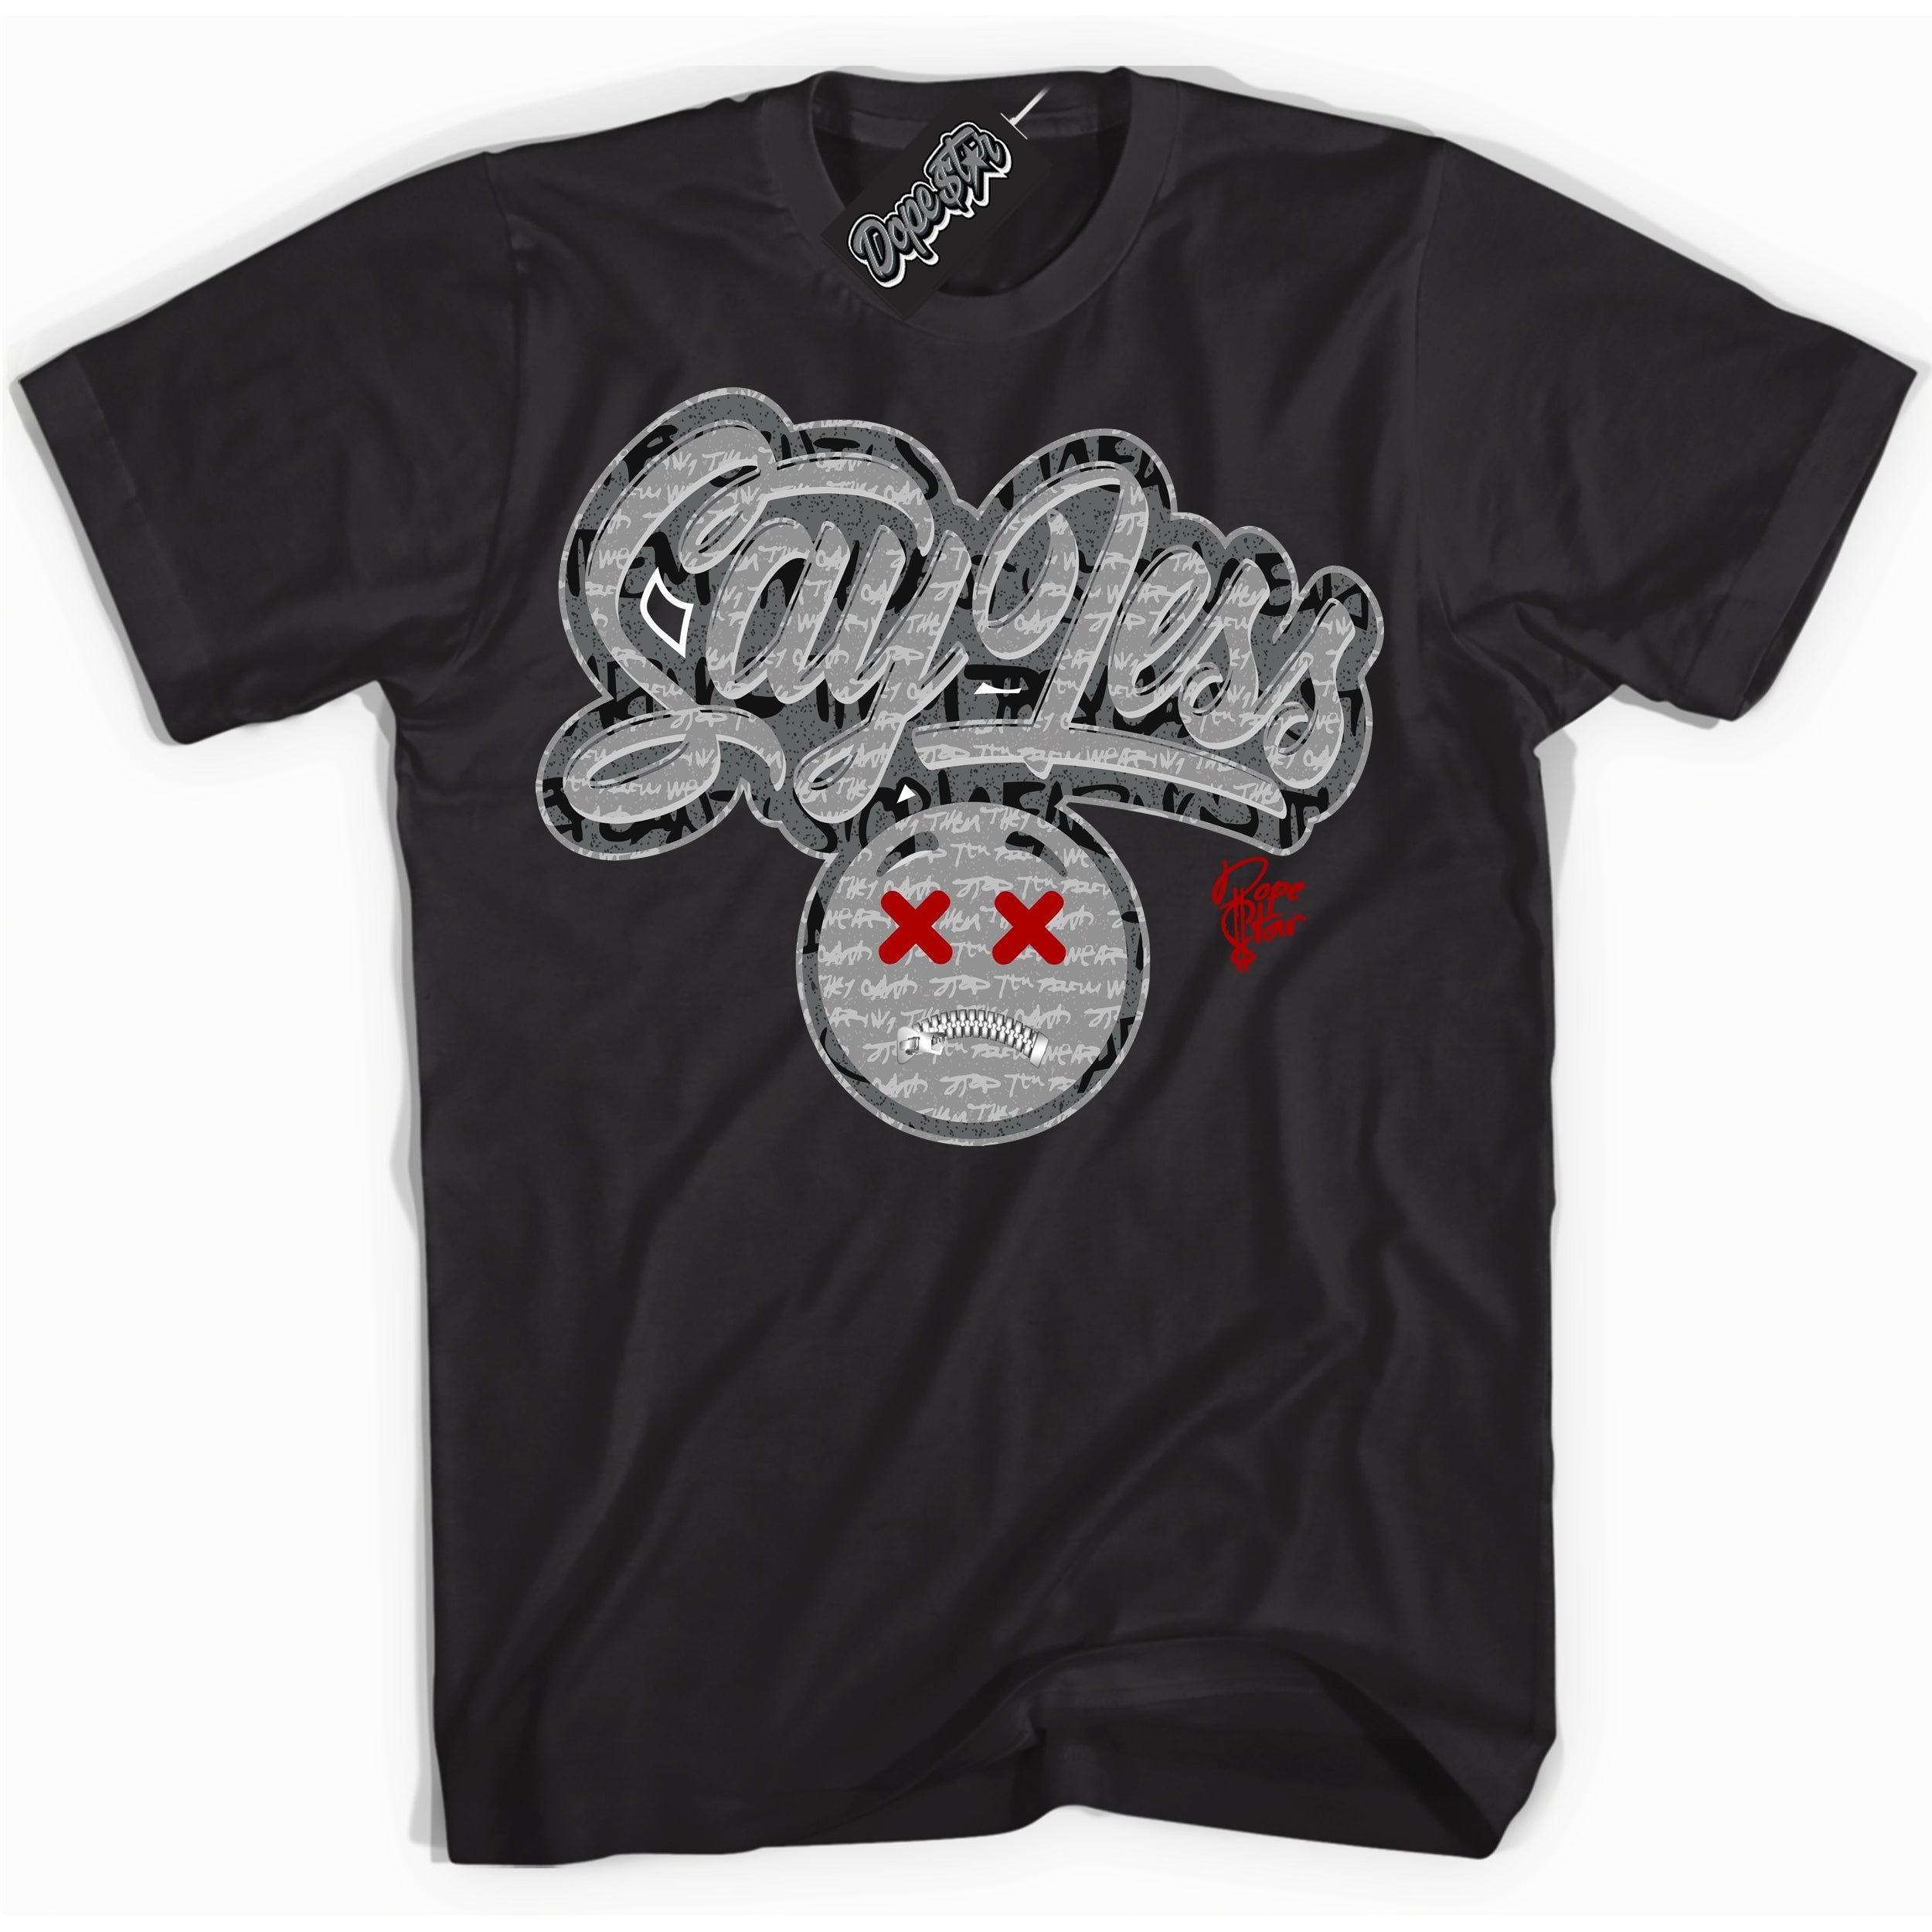 Cool Black Shirt with “ Say Less ” design that perfectly matches Rebellionaire 1s Sneakers.